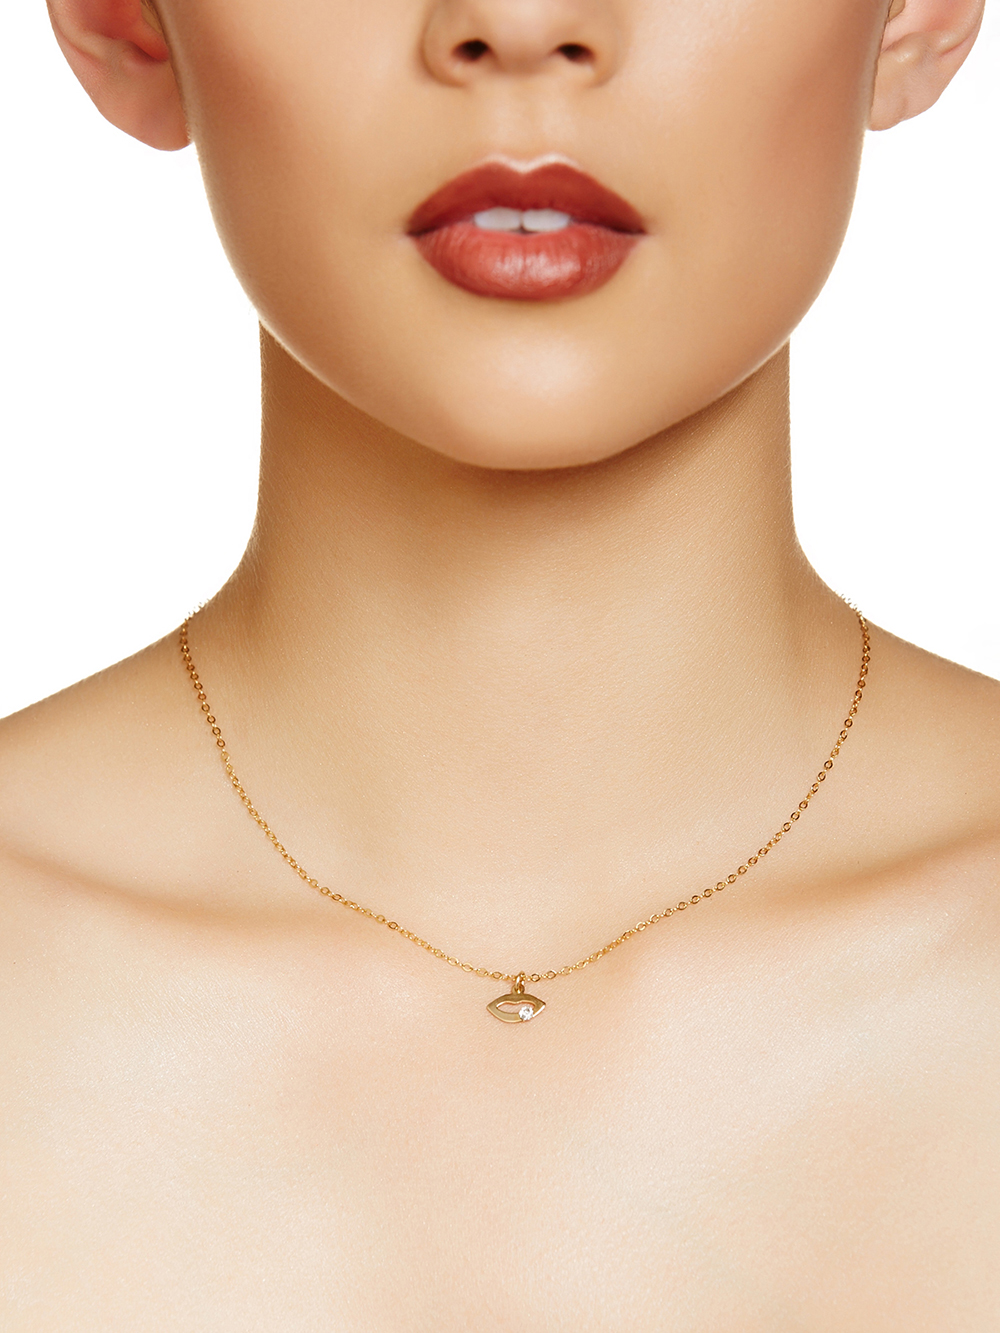 Kiss necklace, $489